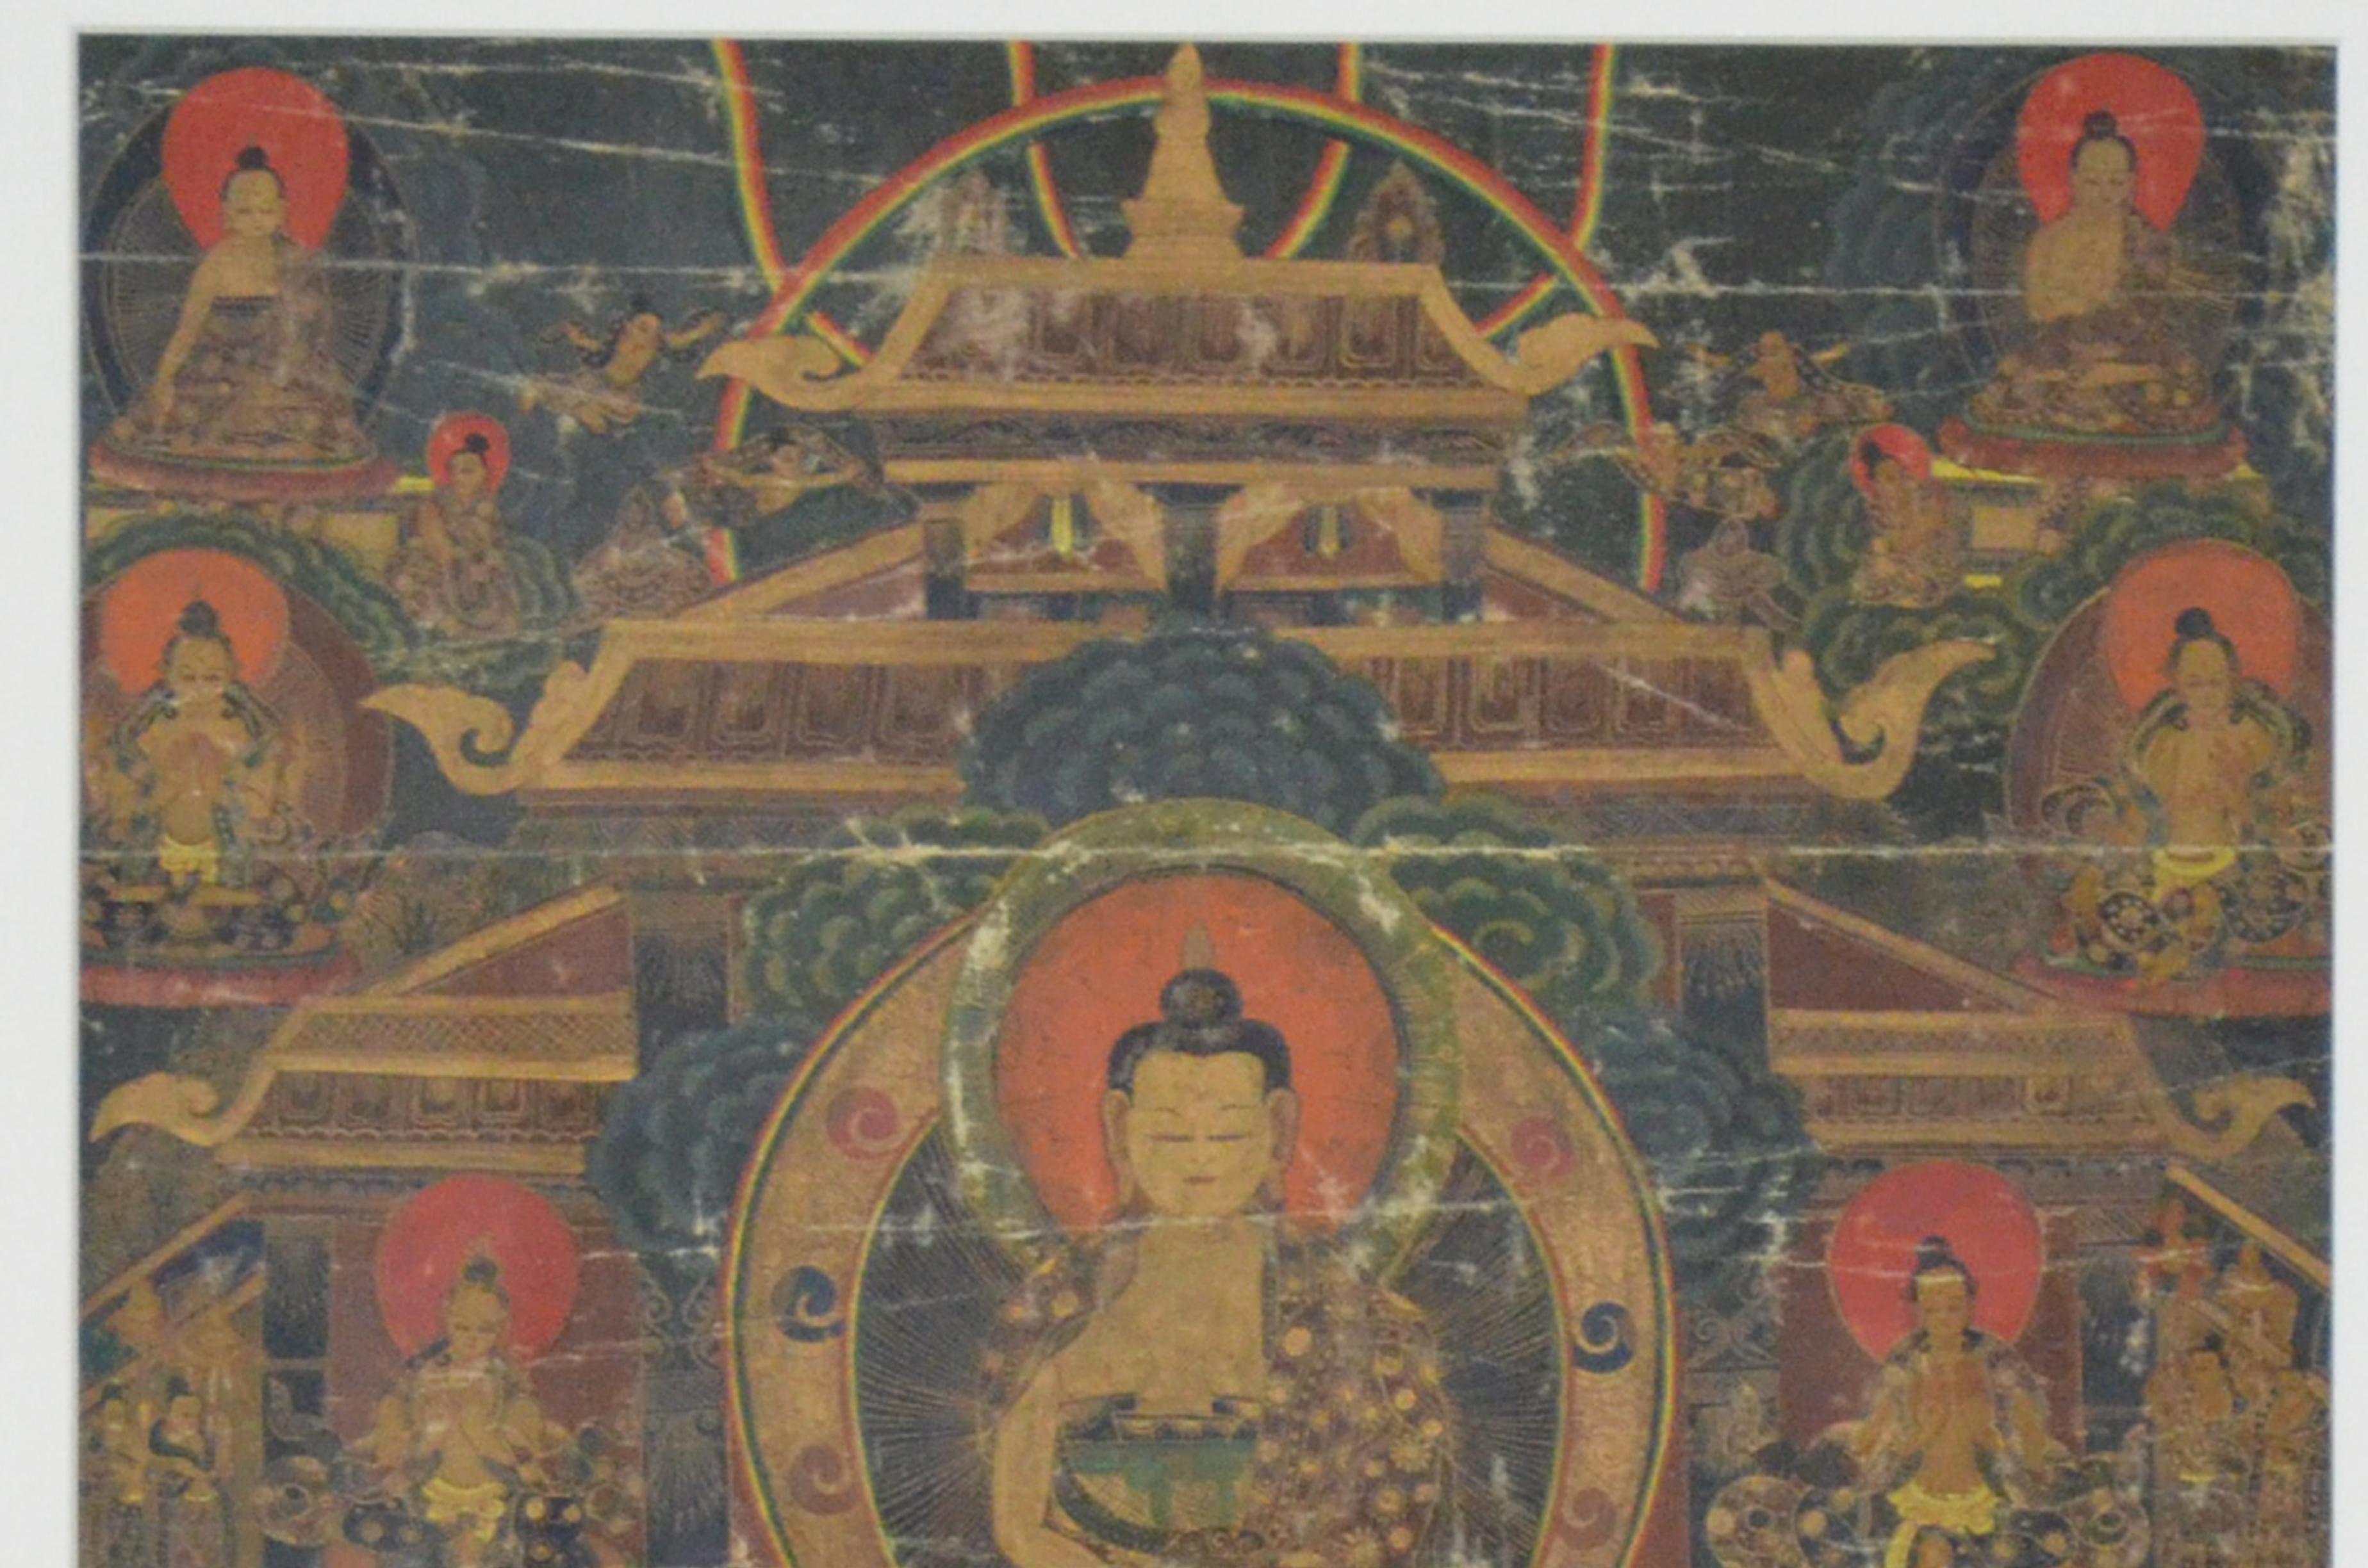 Wood Vintage Hand-Painted Multi-Colored Tibetan Thangka Painting Depicting the Buddha